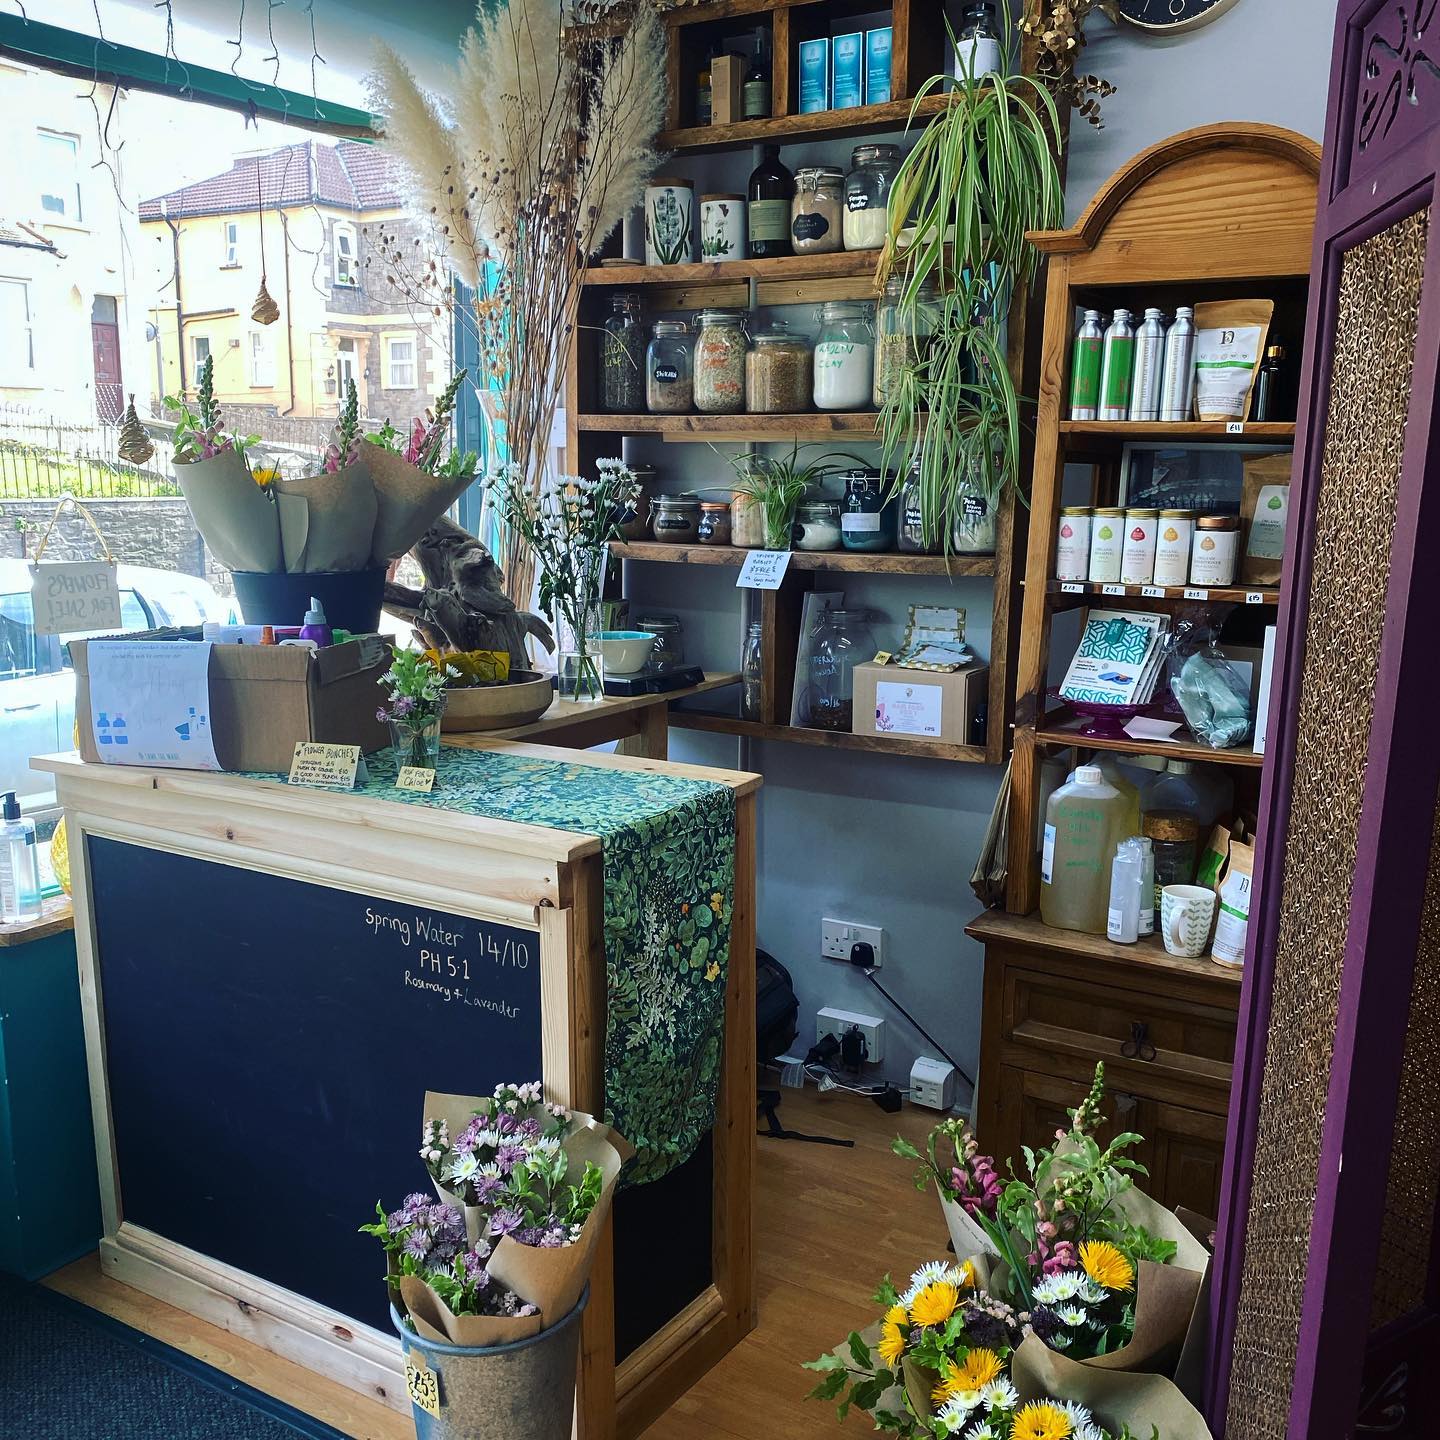 A photograph of a counter with various hand-made hair products \x26 plants.